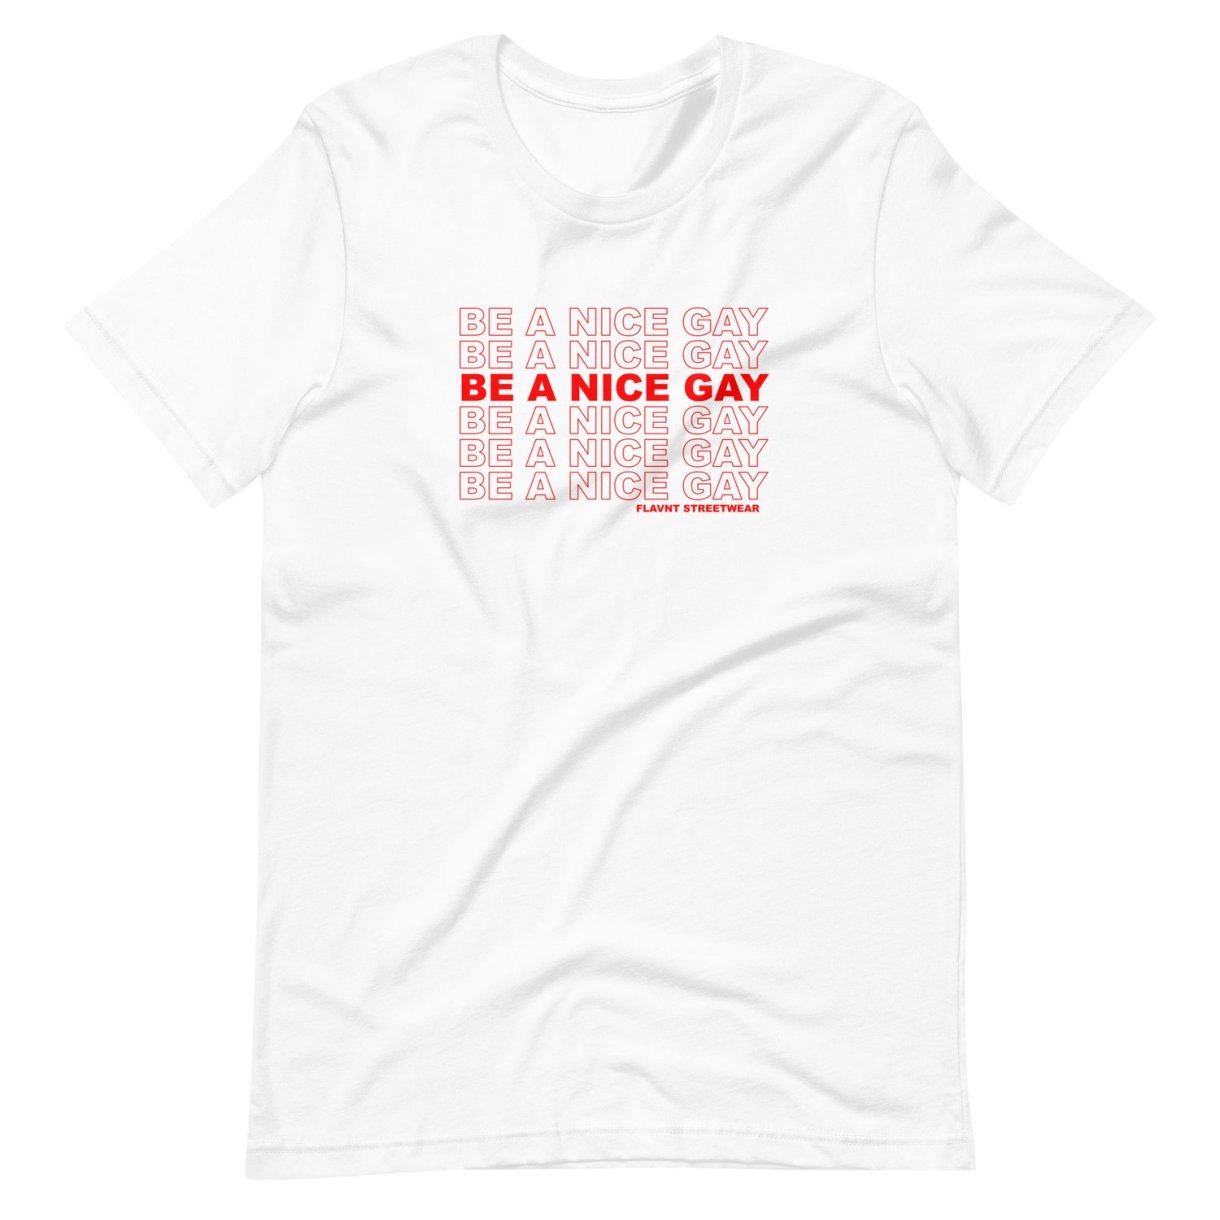 White t-shirt with "Be a Nice Gay" repeated over and over in red print like is is on plastic shopping bags